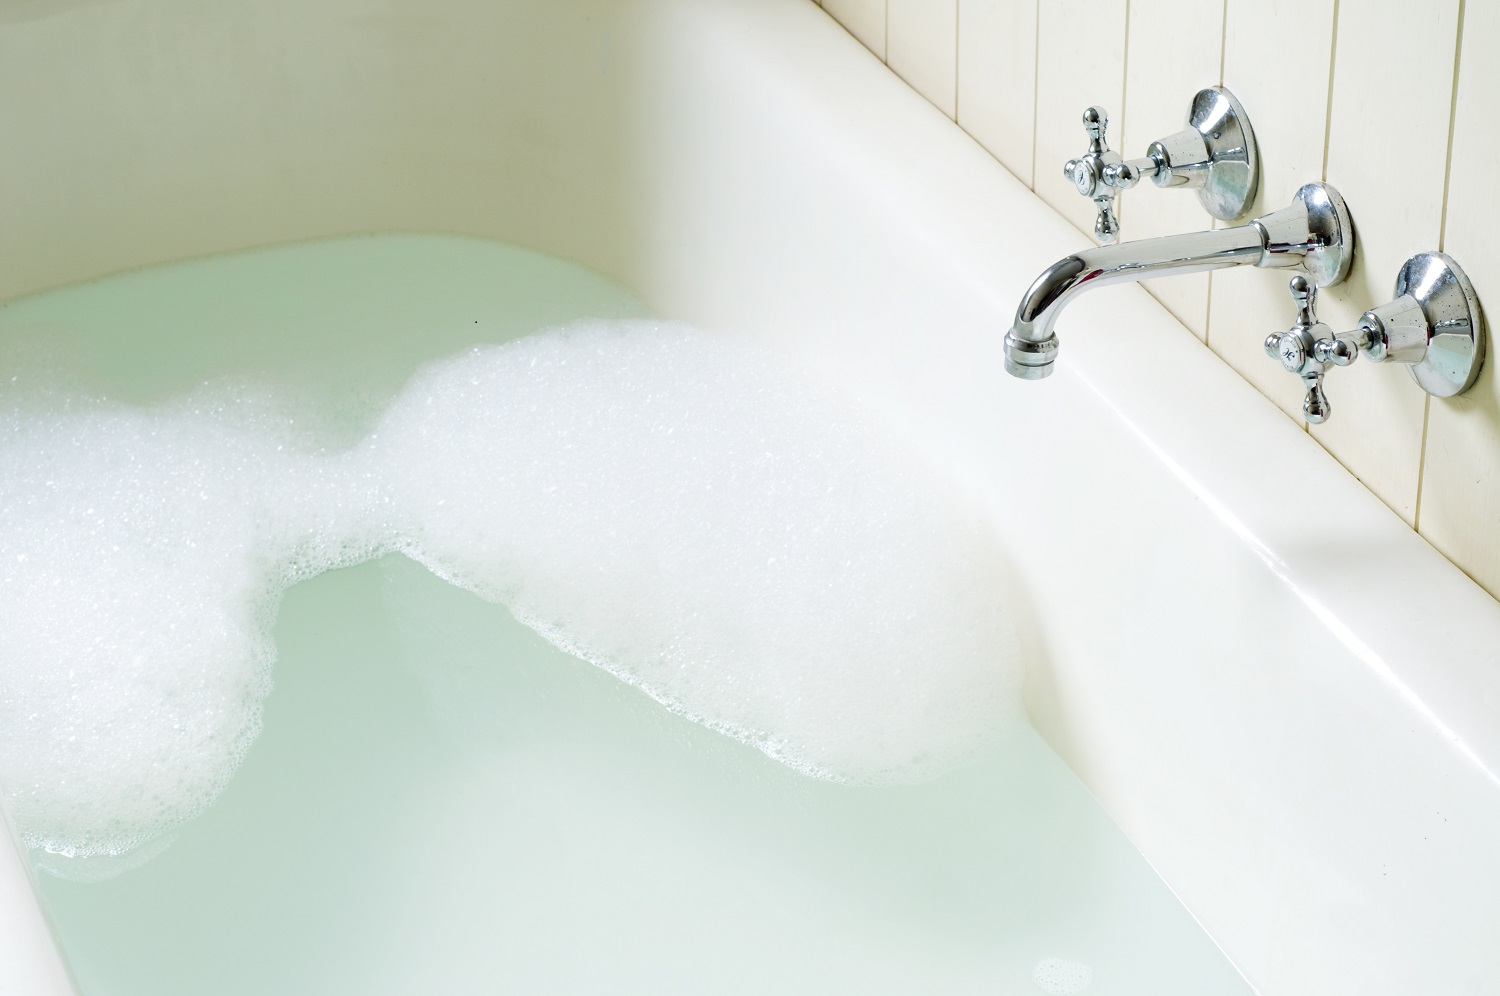 https://www.christiansonco.com/wp-content/uploads/2020/02/old-bath-tub-with-bubbles.jpg